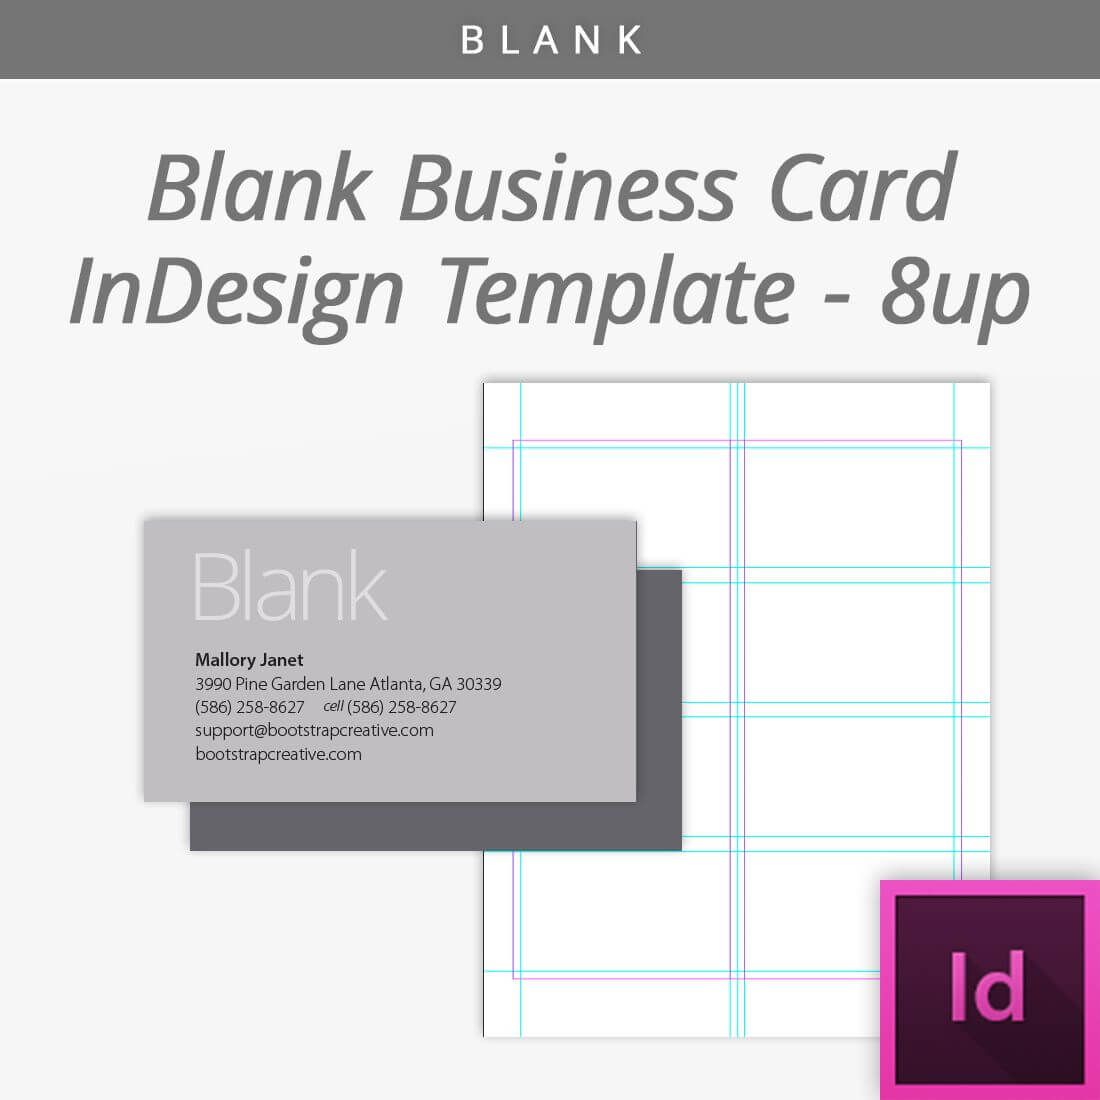 Bootstrap Creative | Blank Business Cards, Free Business Within Birthday Card Indesign Template